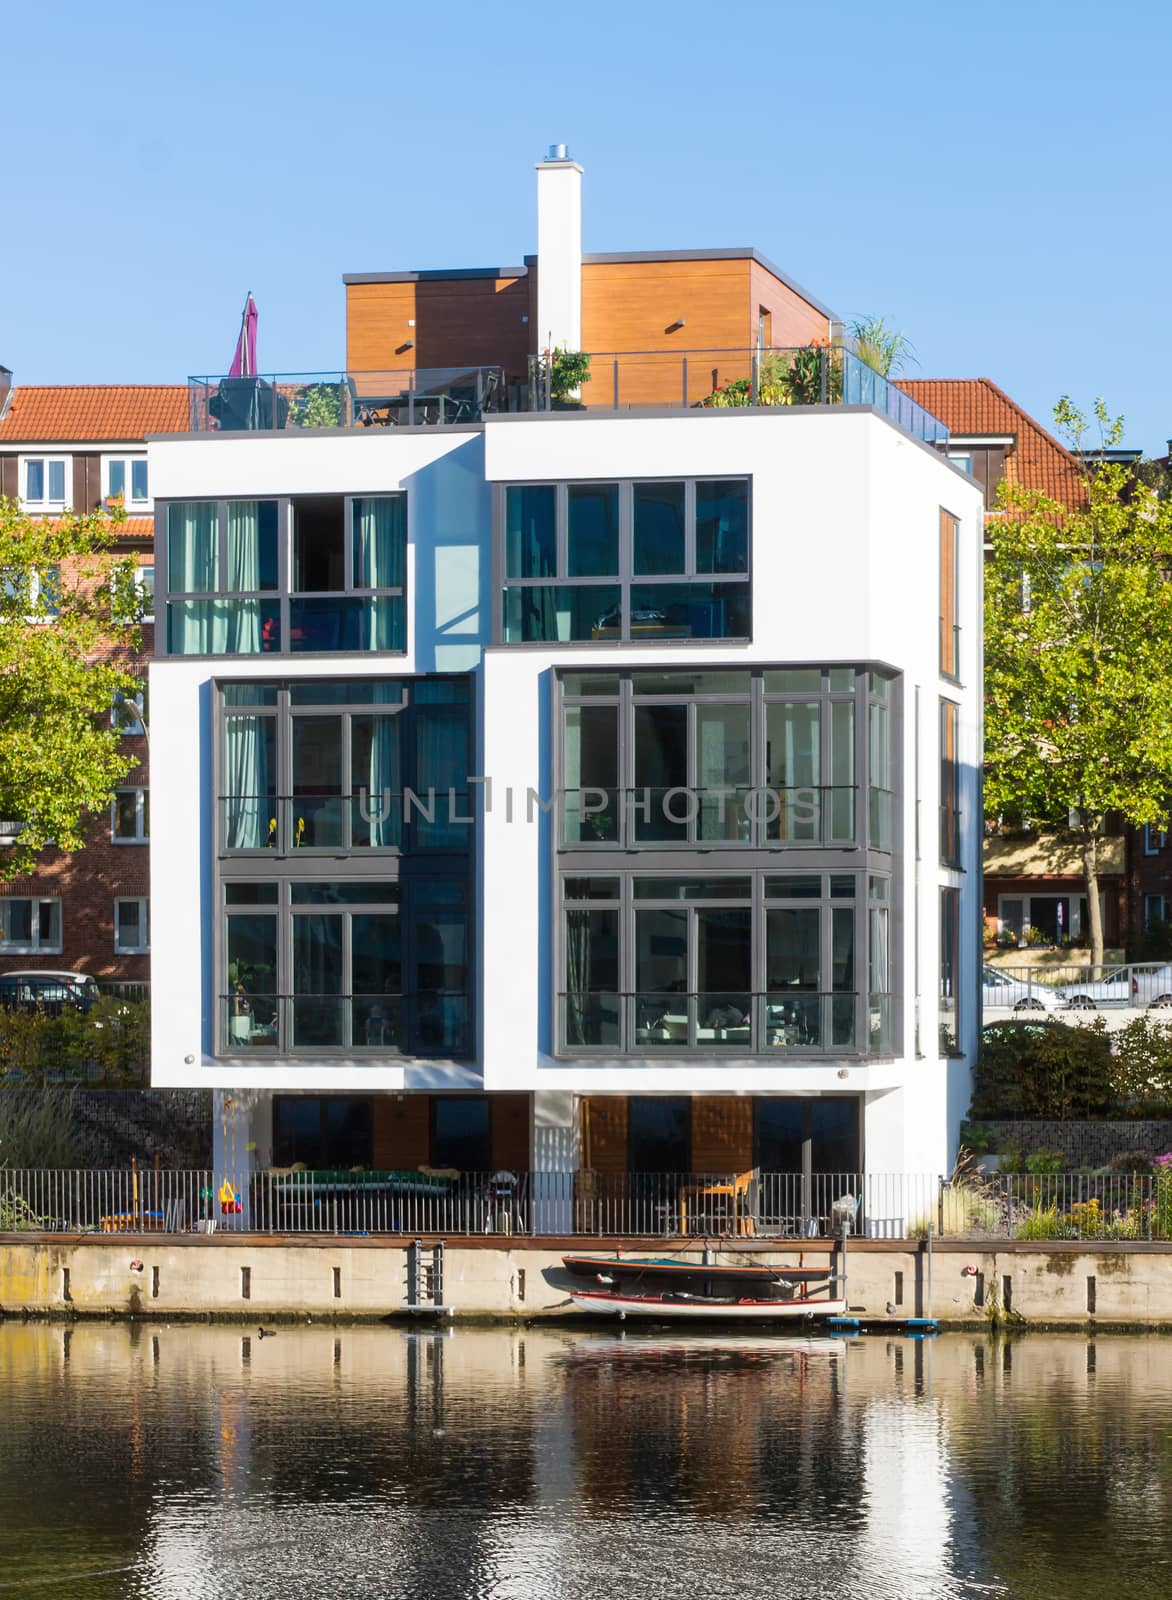 Townhouse at the waterside seen in Hamburg, Germany